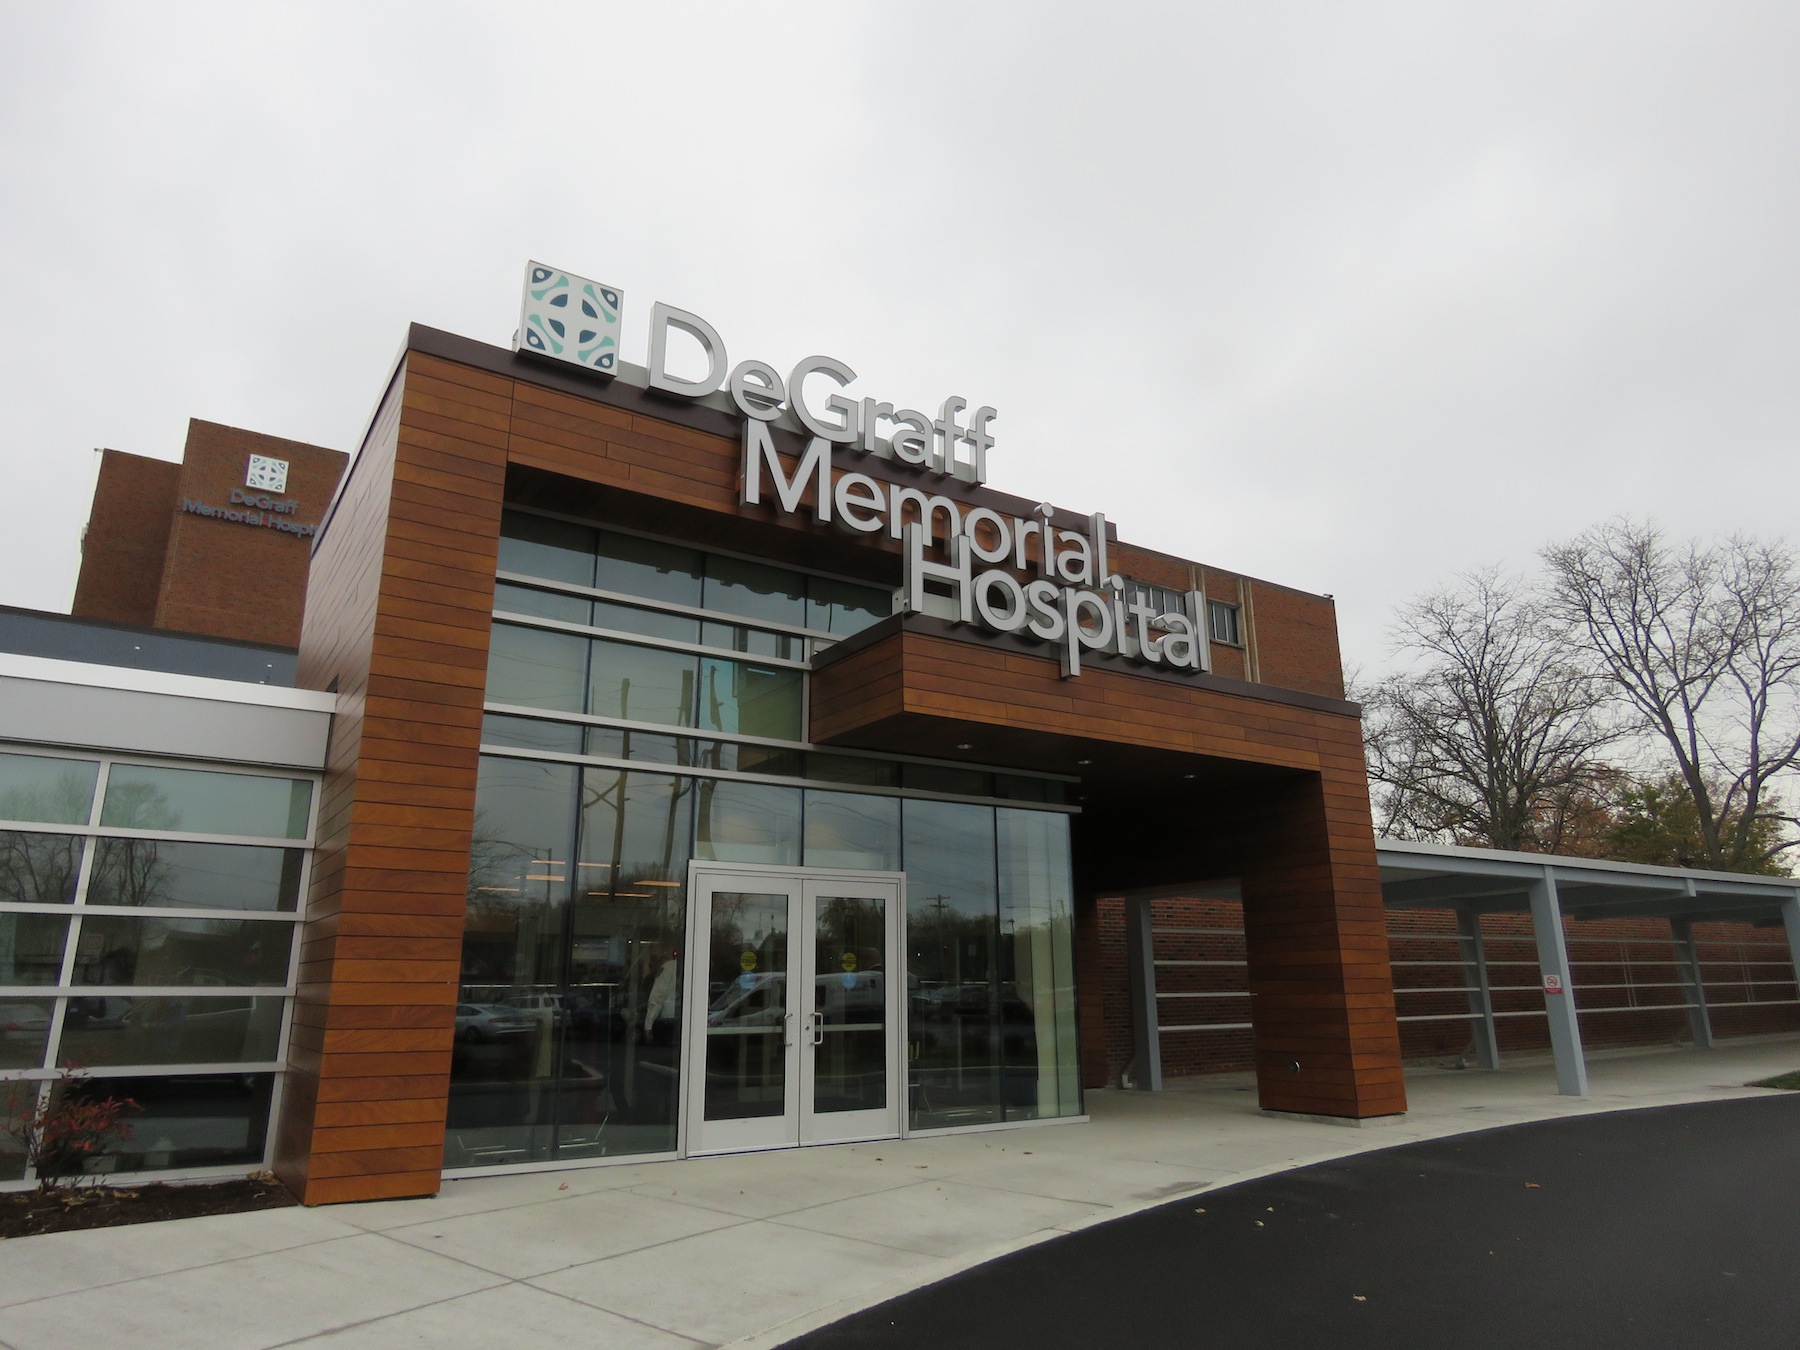 The entrance to the new emergency department at DeGraff Memorial Hospital. (Photos by David Yarger)